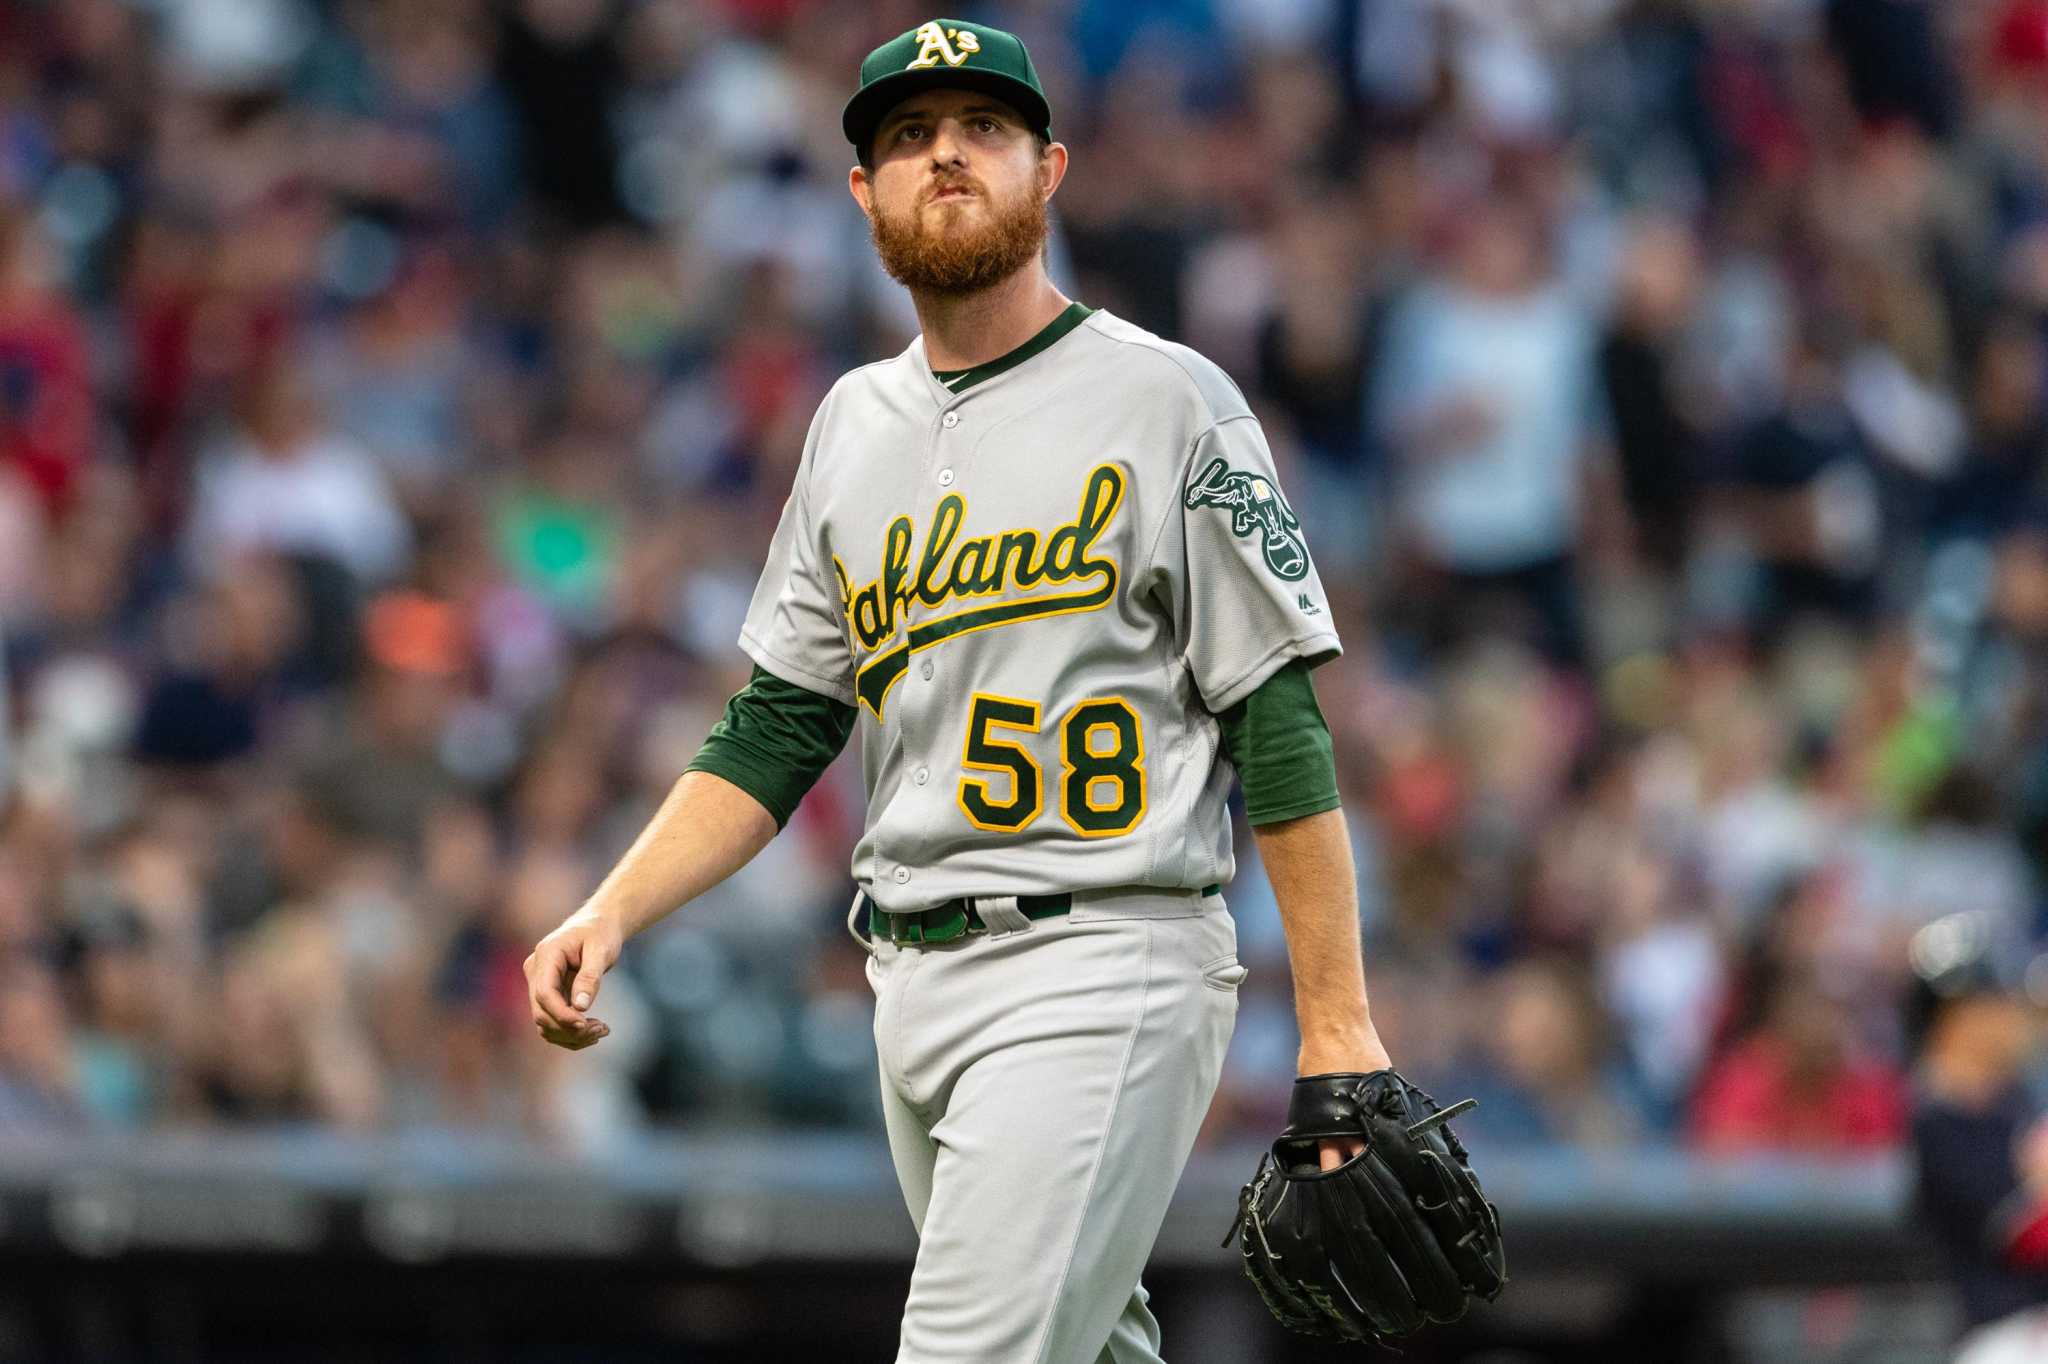 Oakland's Chris Bassitt suffered facial fracture, released from